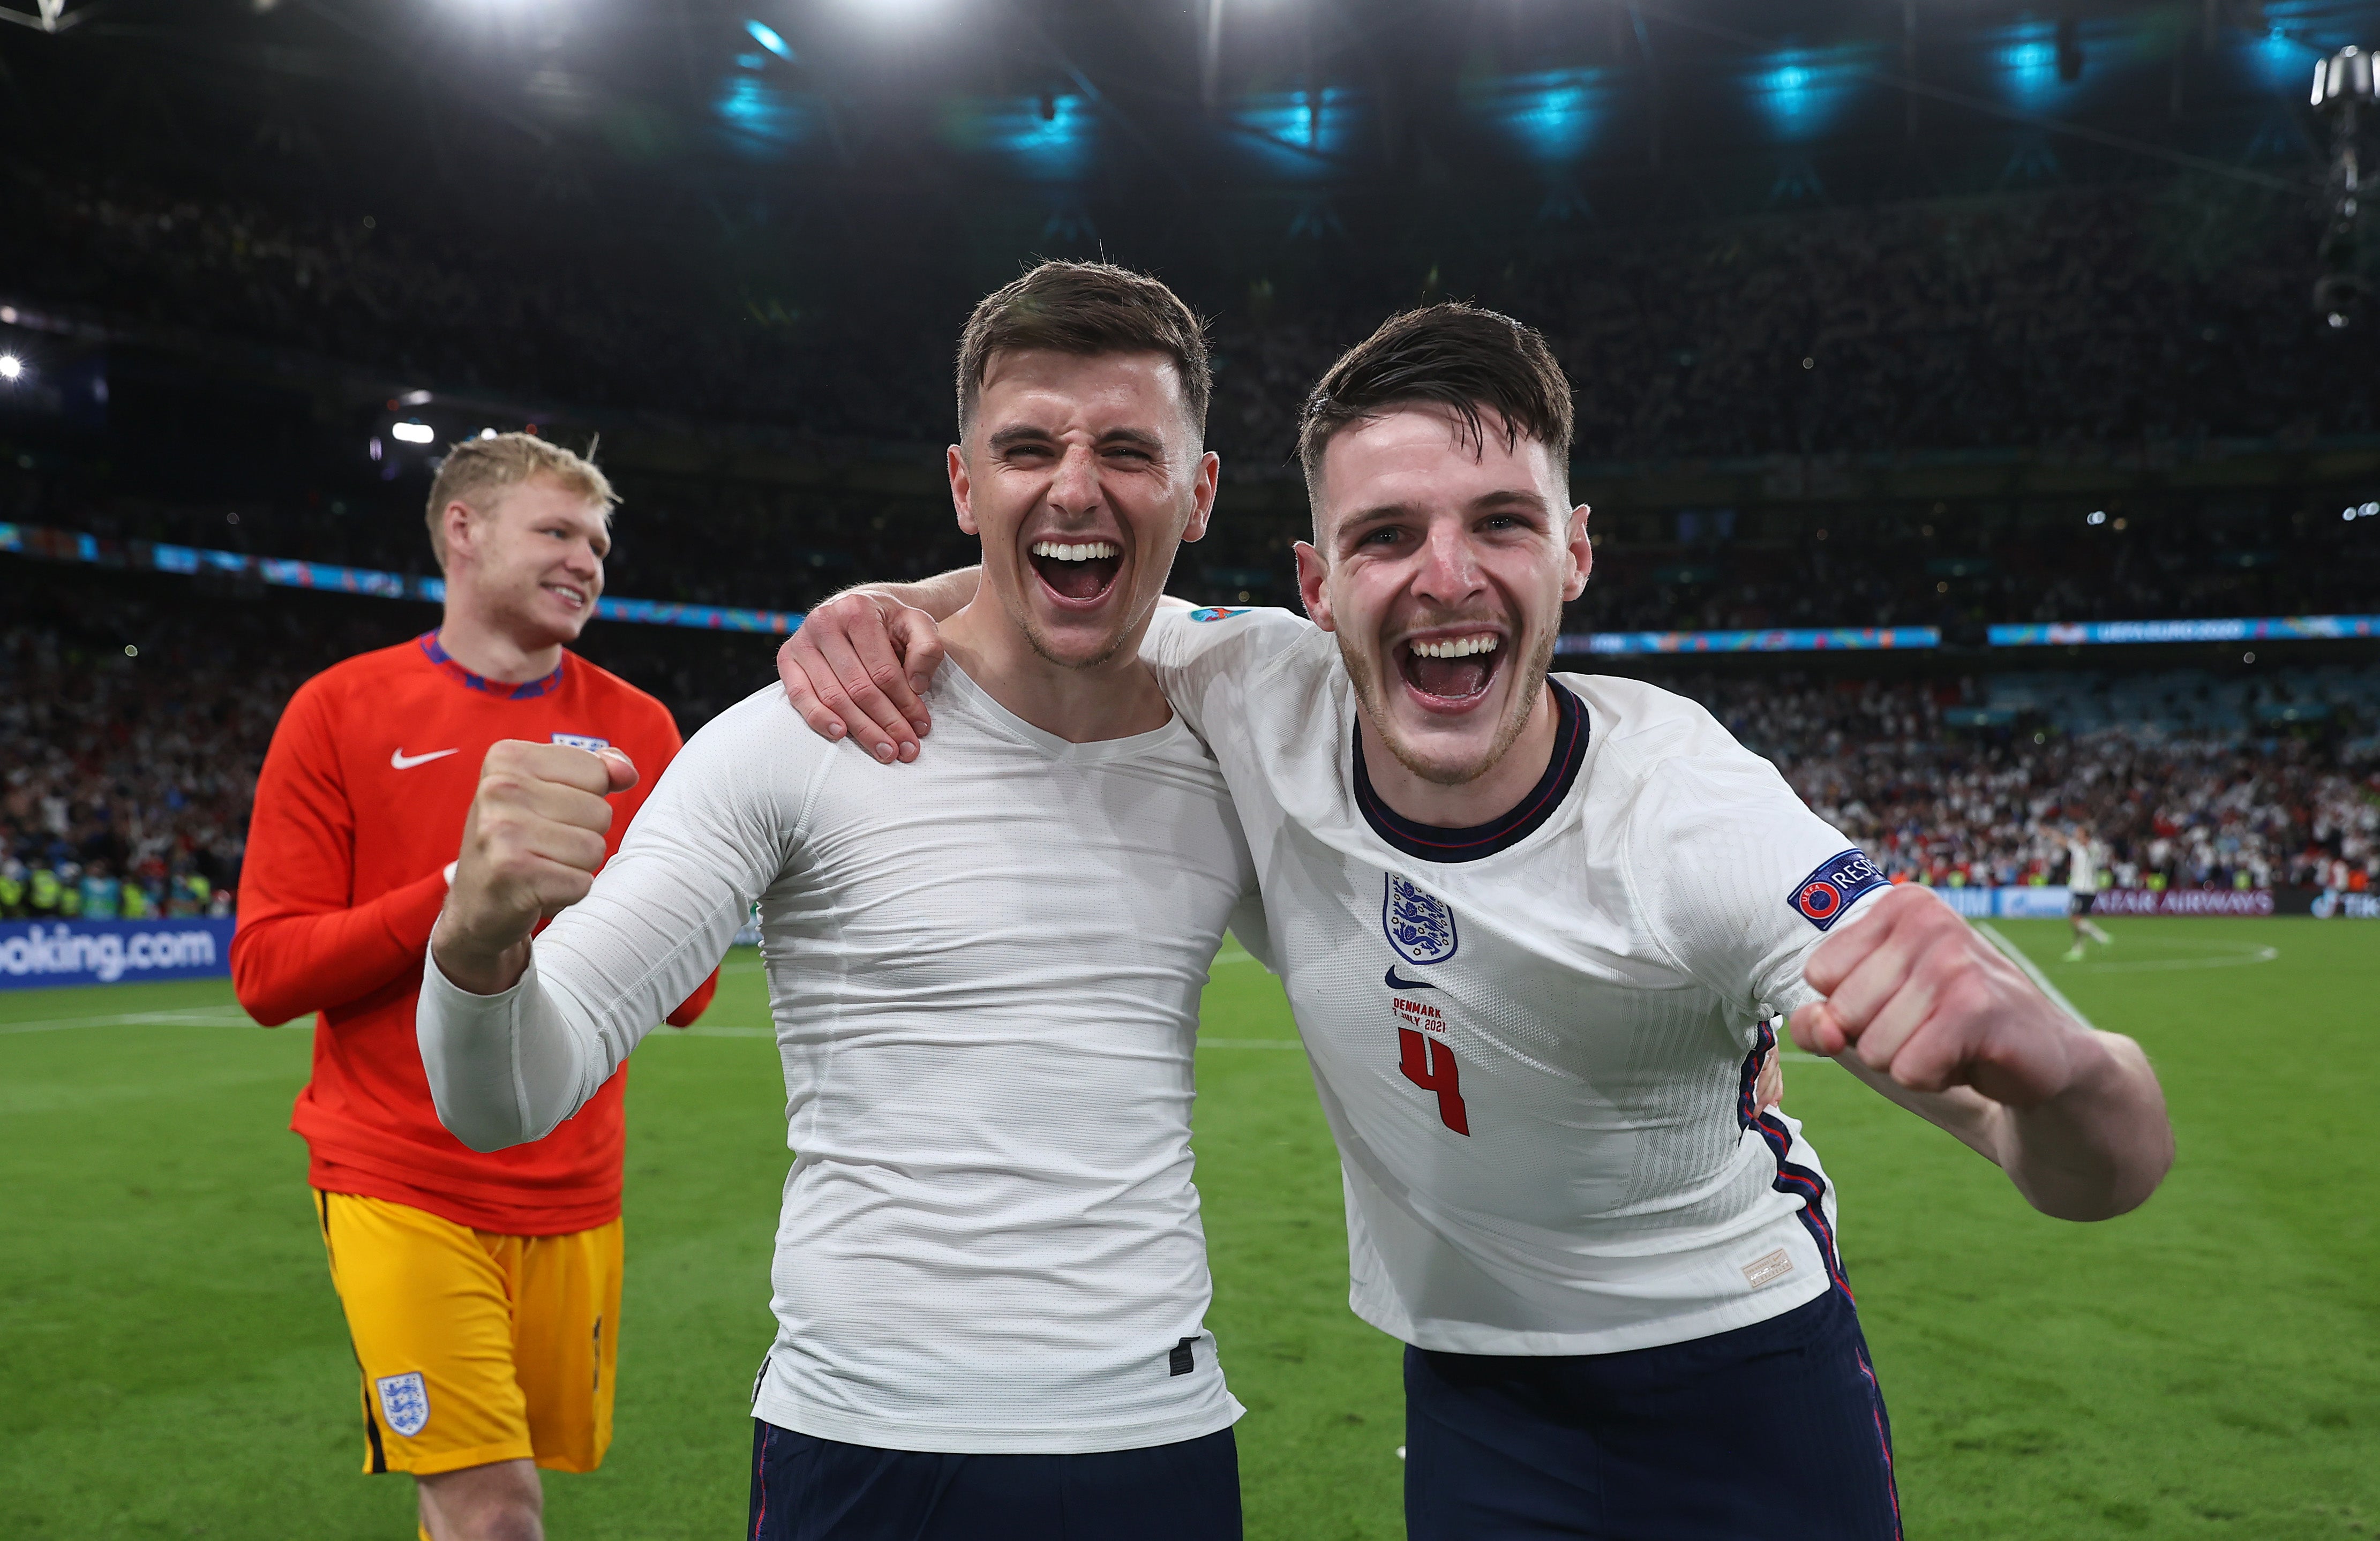 Mason Mount and Declan Rice were key for England during Euro 2020